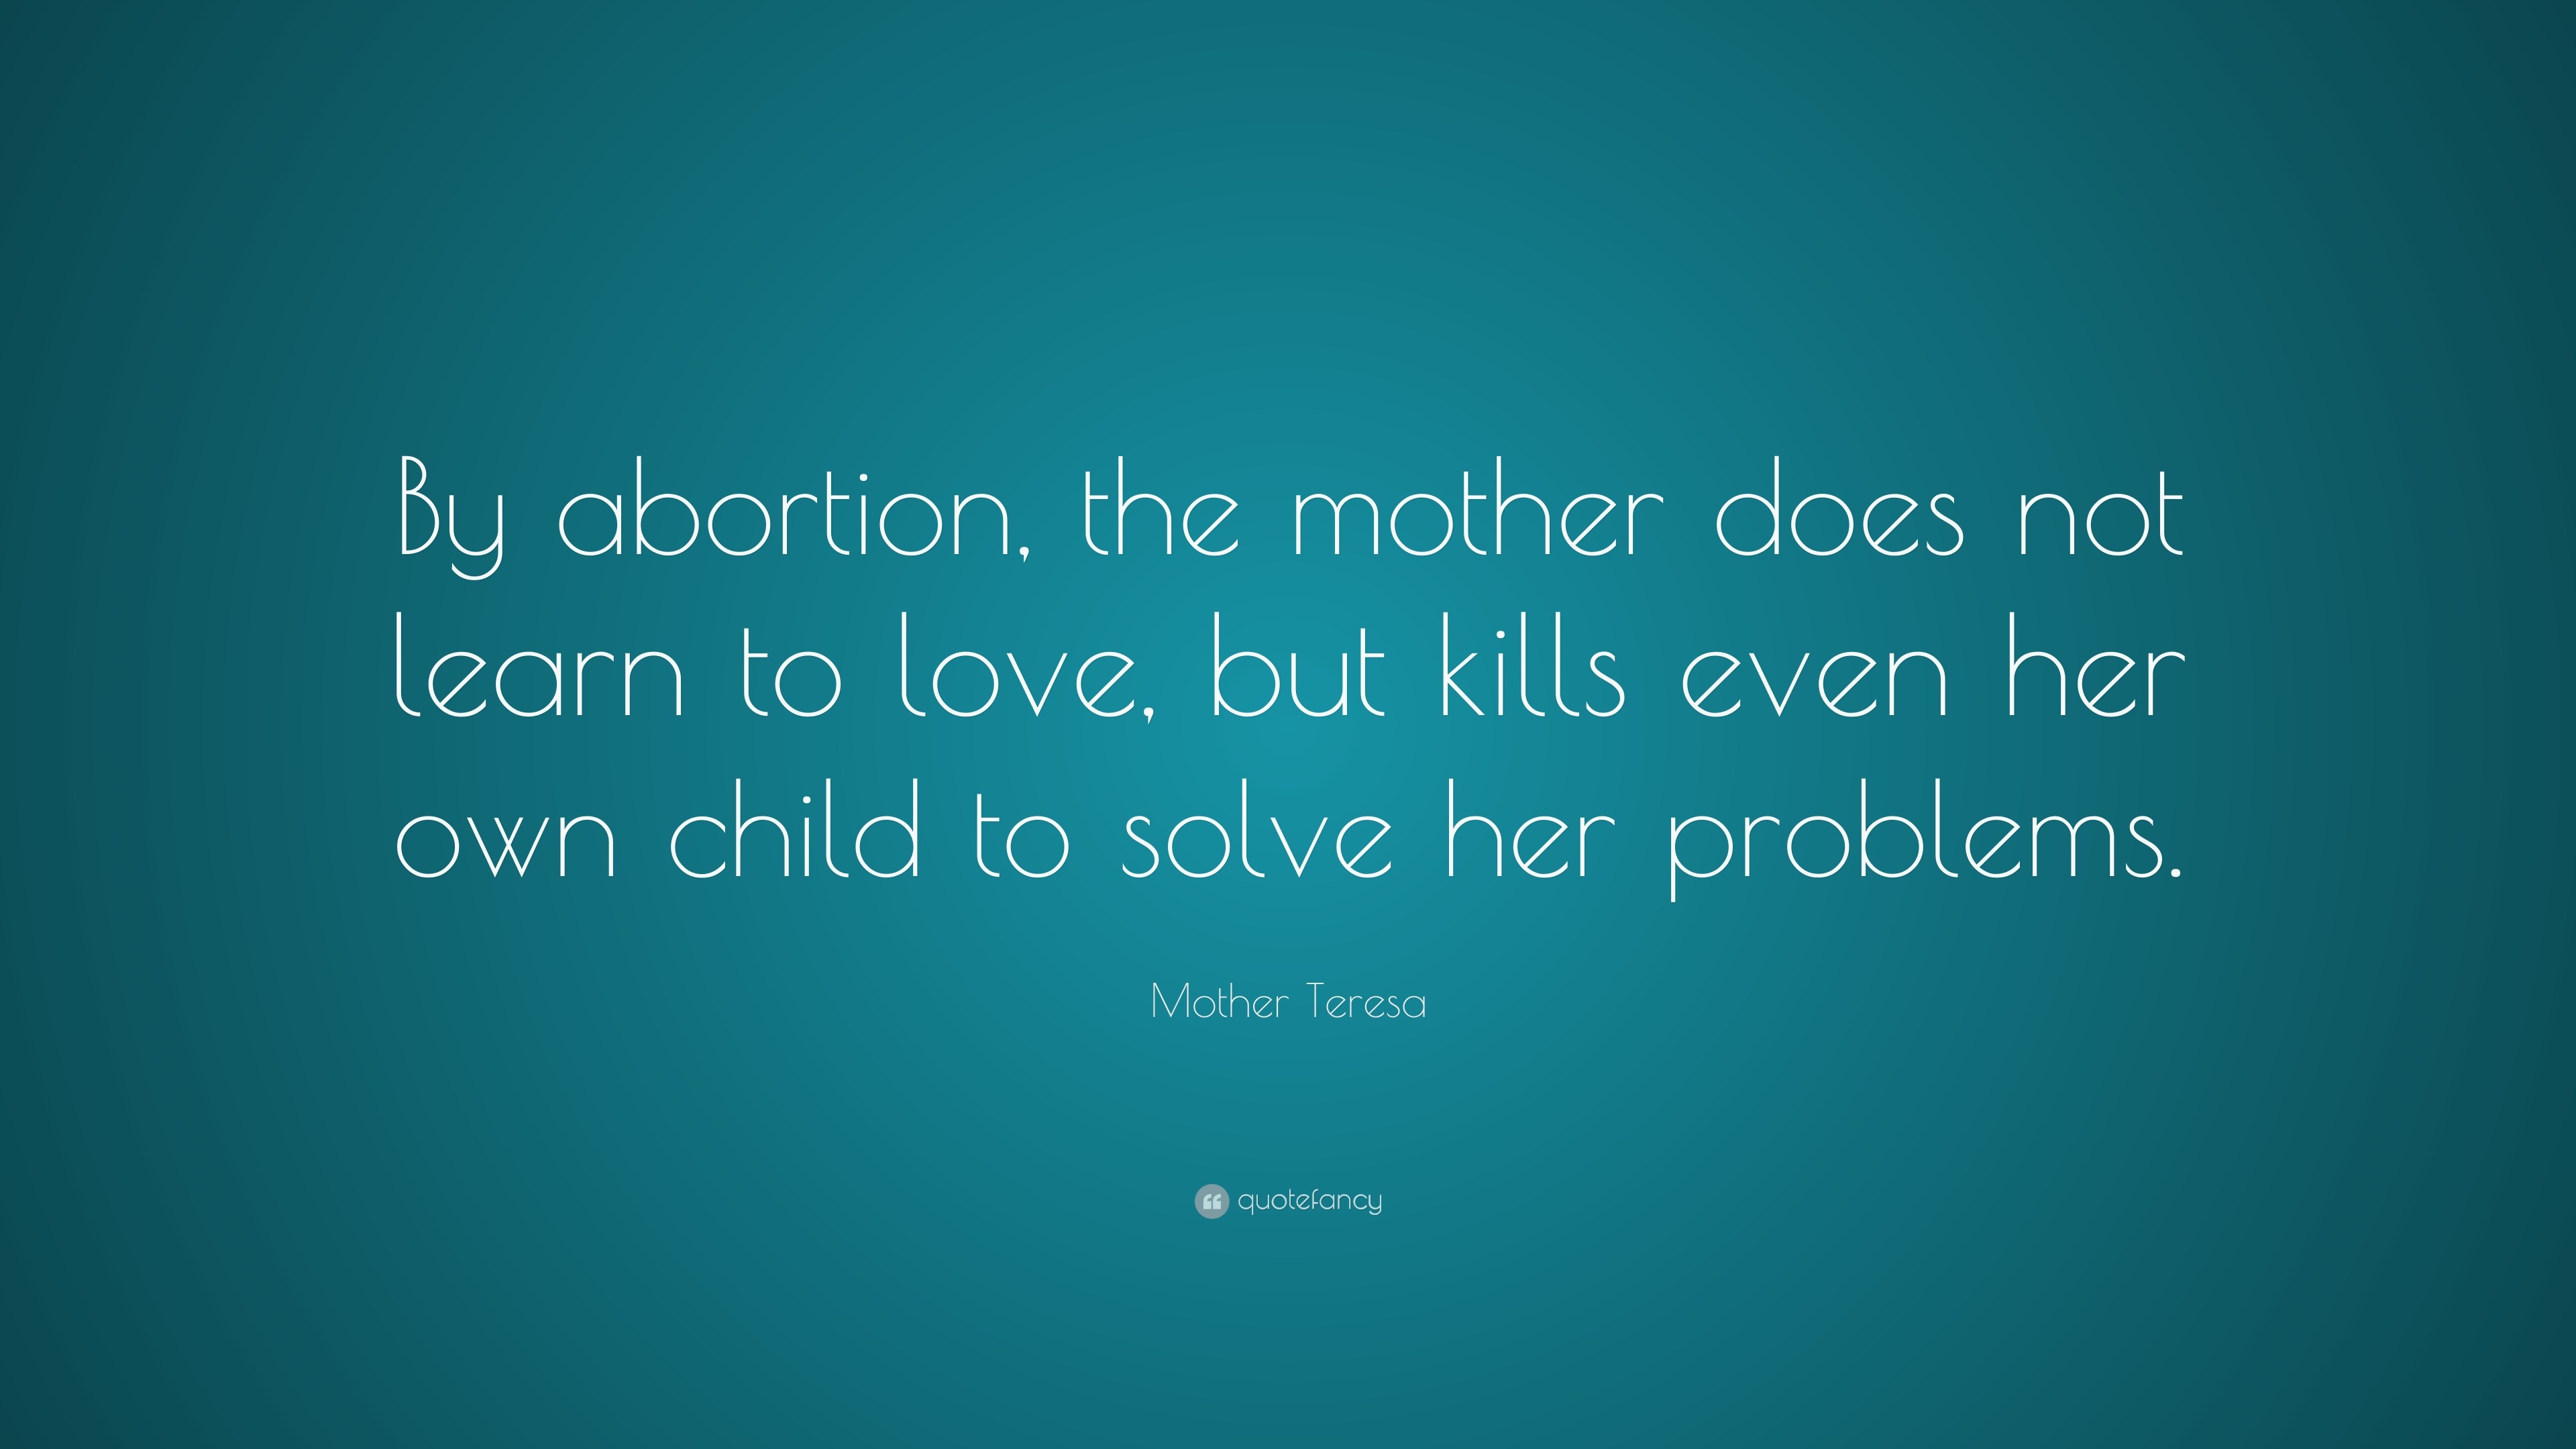 Mother Teresa Quote “By the mother does not learn to love